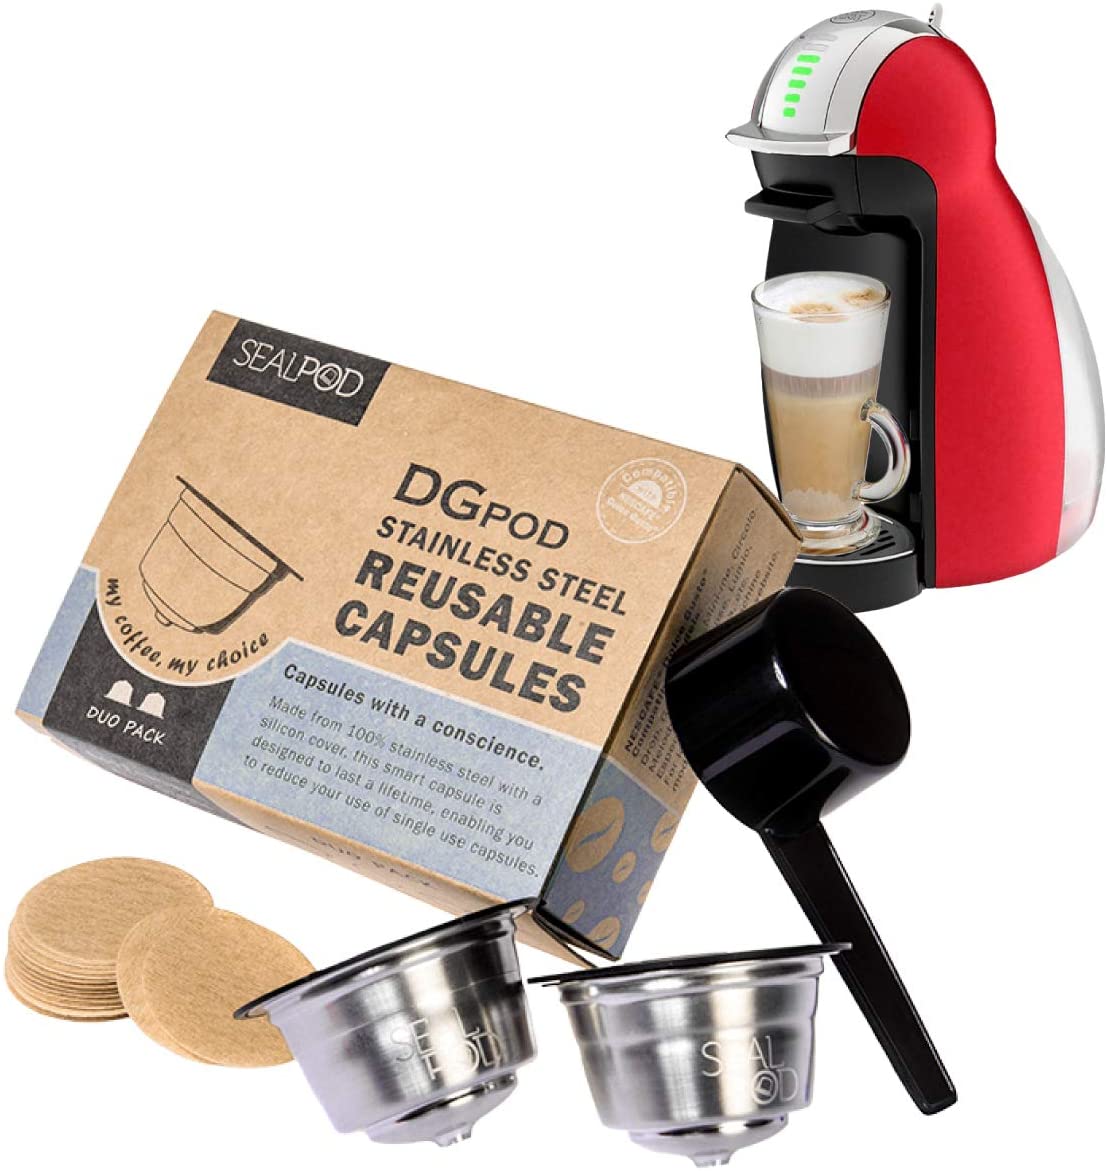 Refill Capsule Dolce Gusto, Dolce Gusto Reusable Capsule